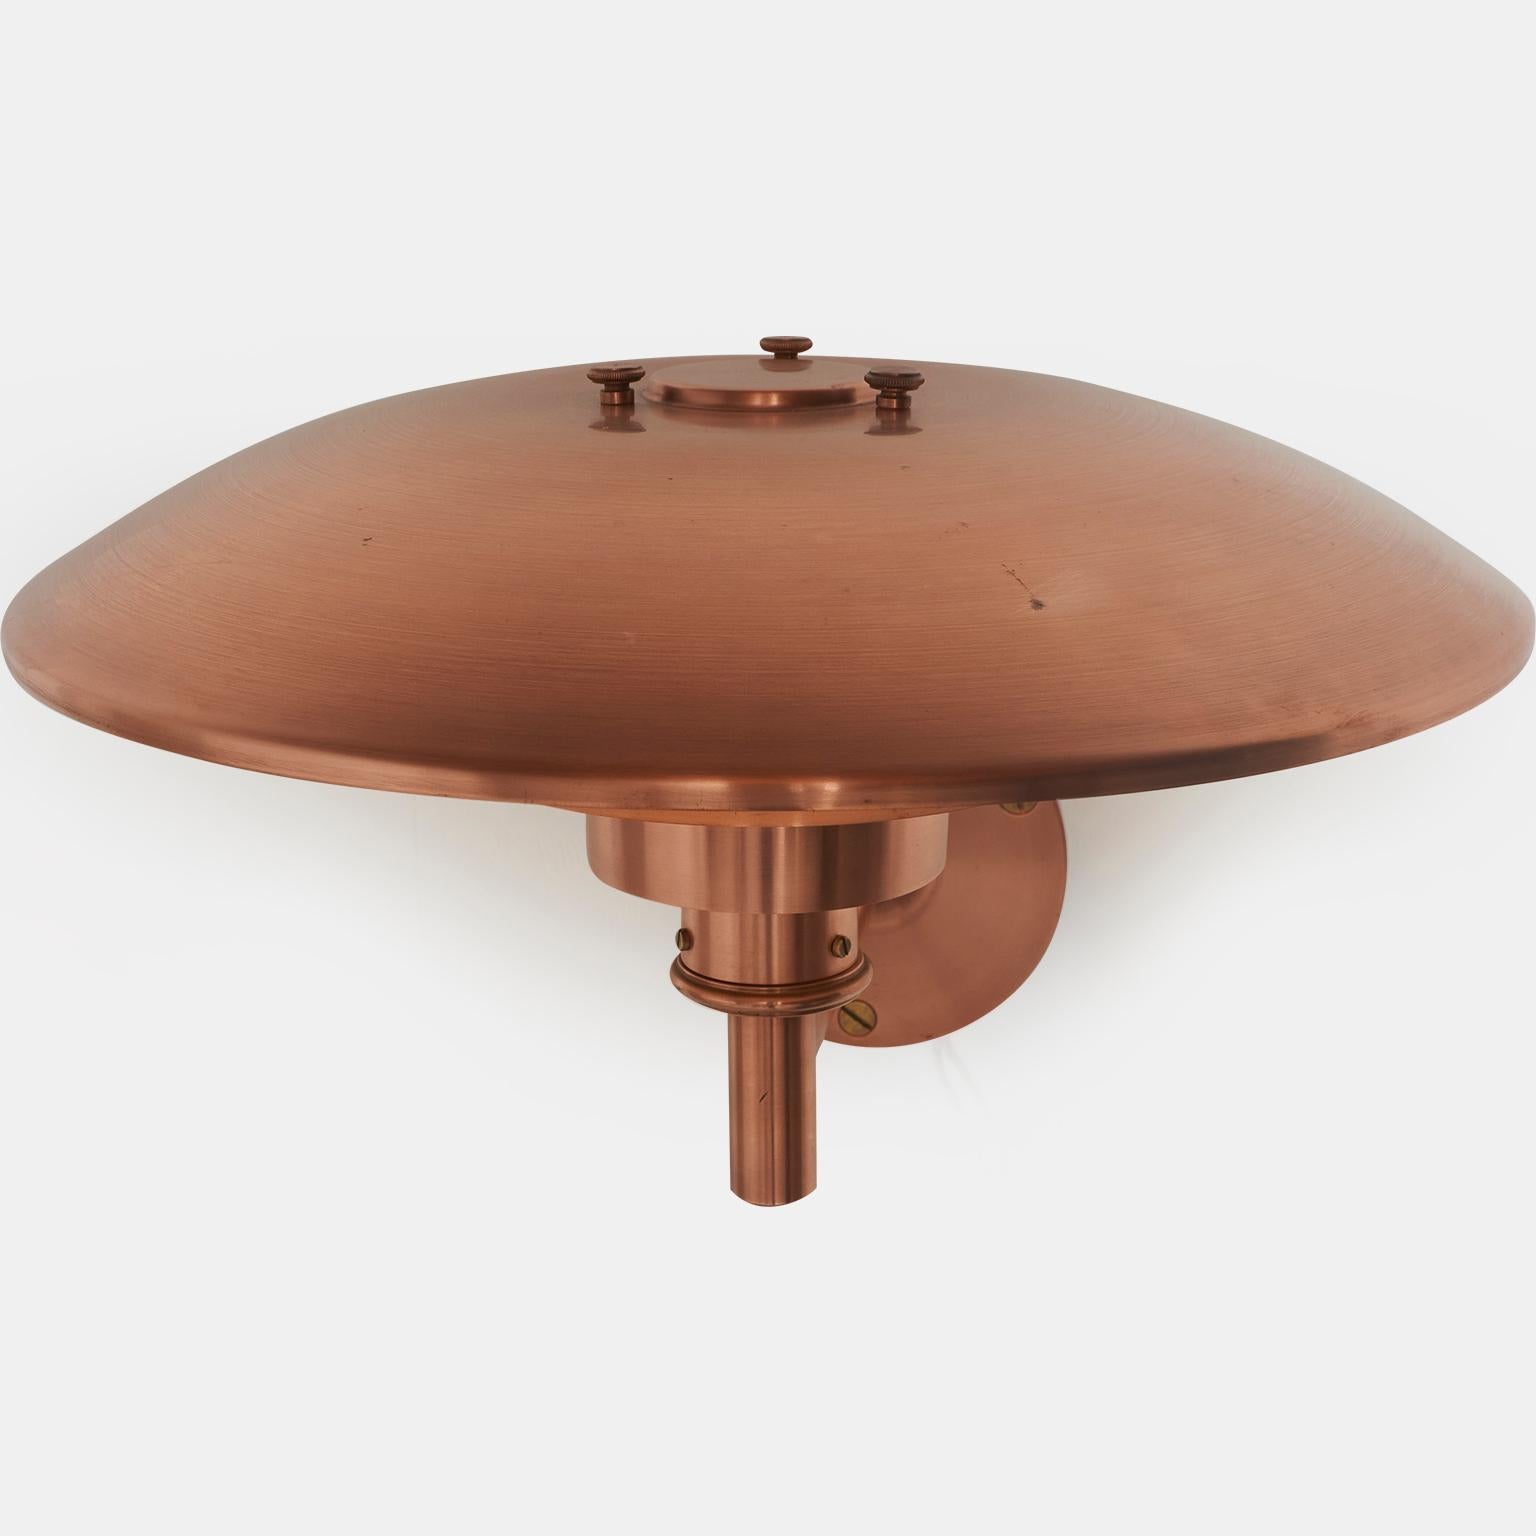 A PH 4.5/3 outdoor sconce with a straight arm. The sconce is made from copper and has been restored so it is bright and shiny. The underside is painted white to reflect the light and is in original condition. The top of the shade has some small